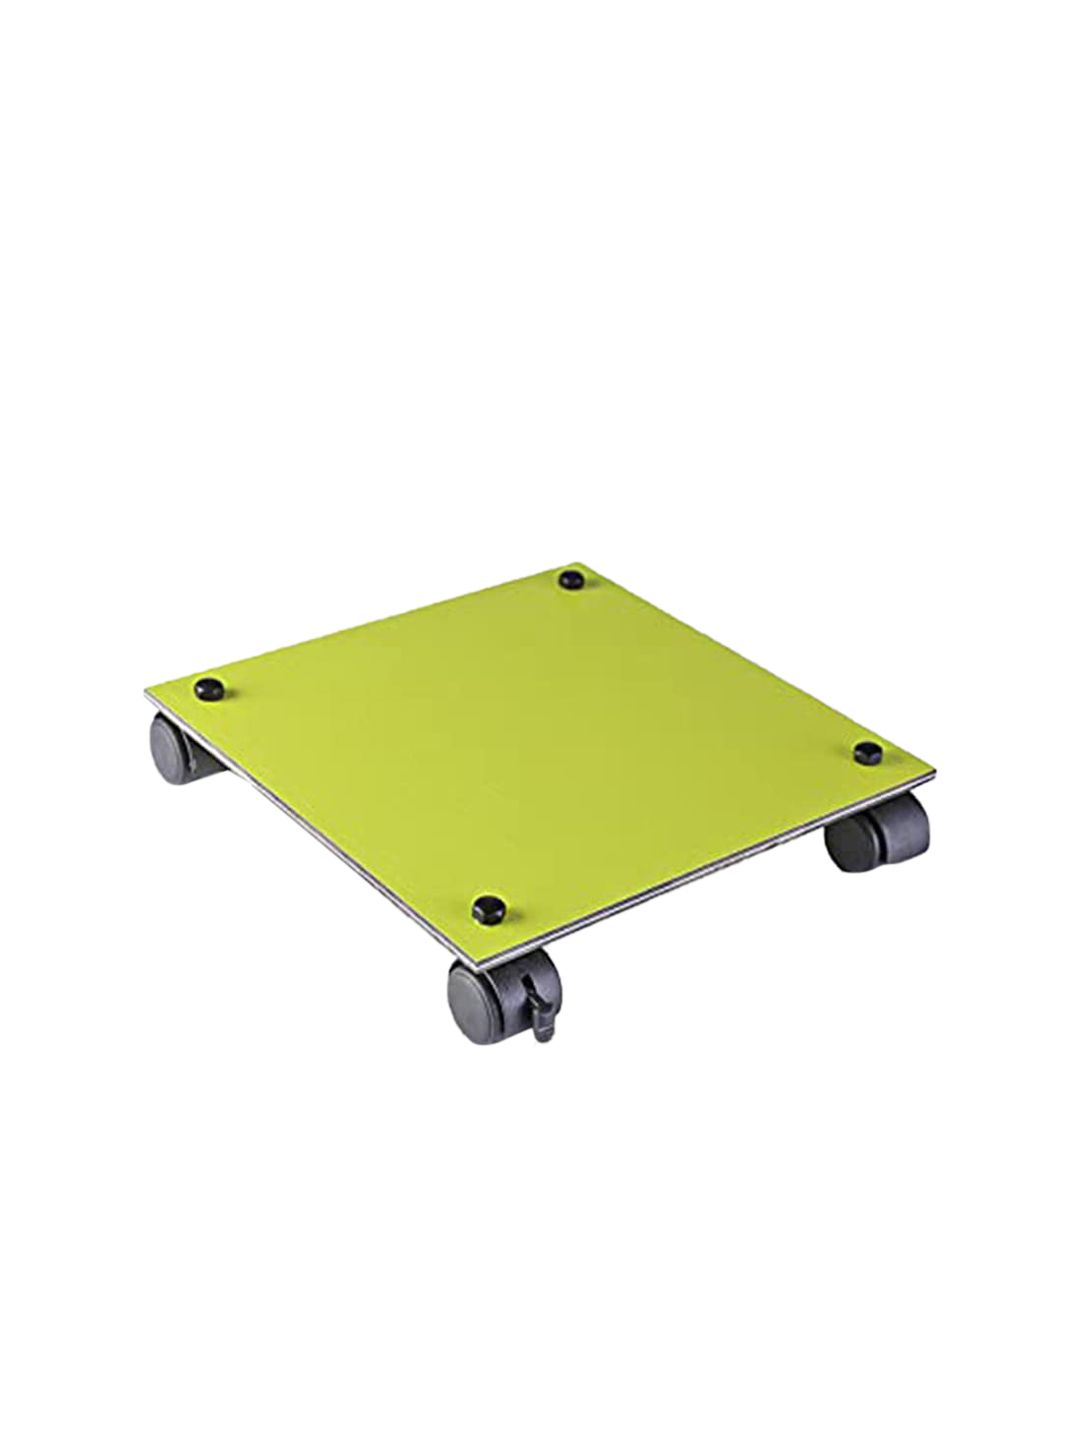 Sharpex Green Solid Square Dolly Wheel Metal Plant Stand Price in India